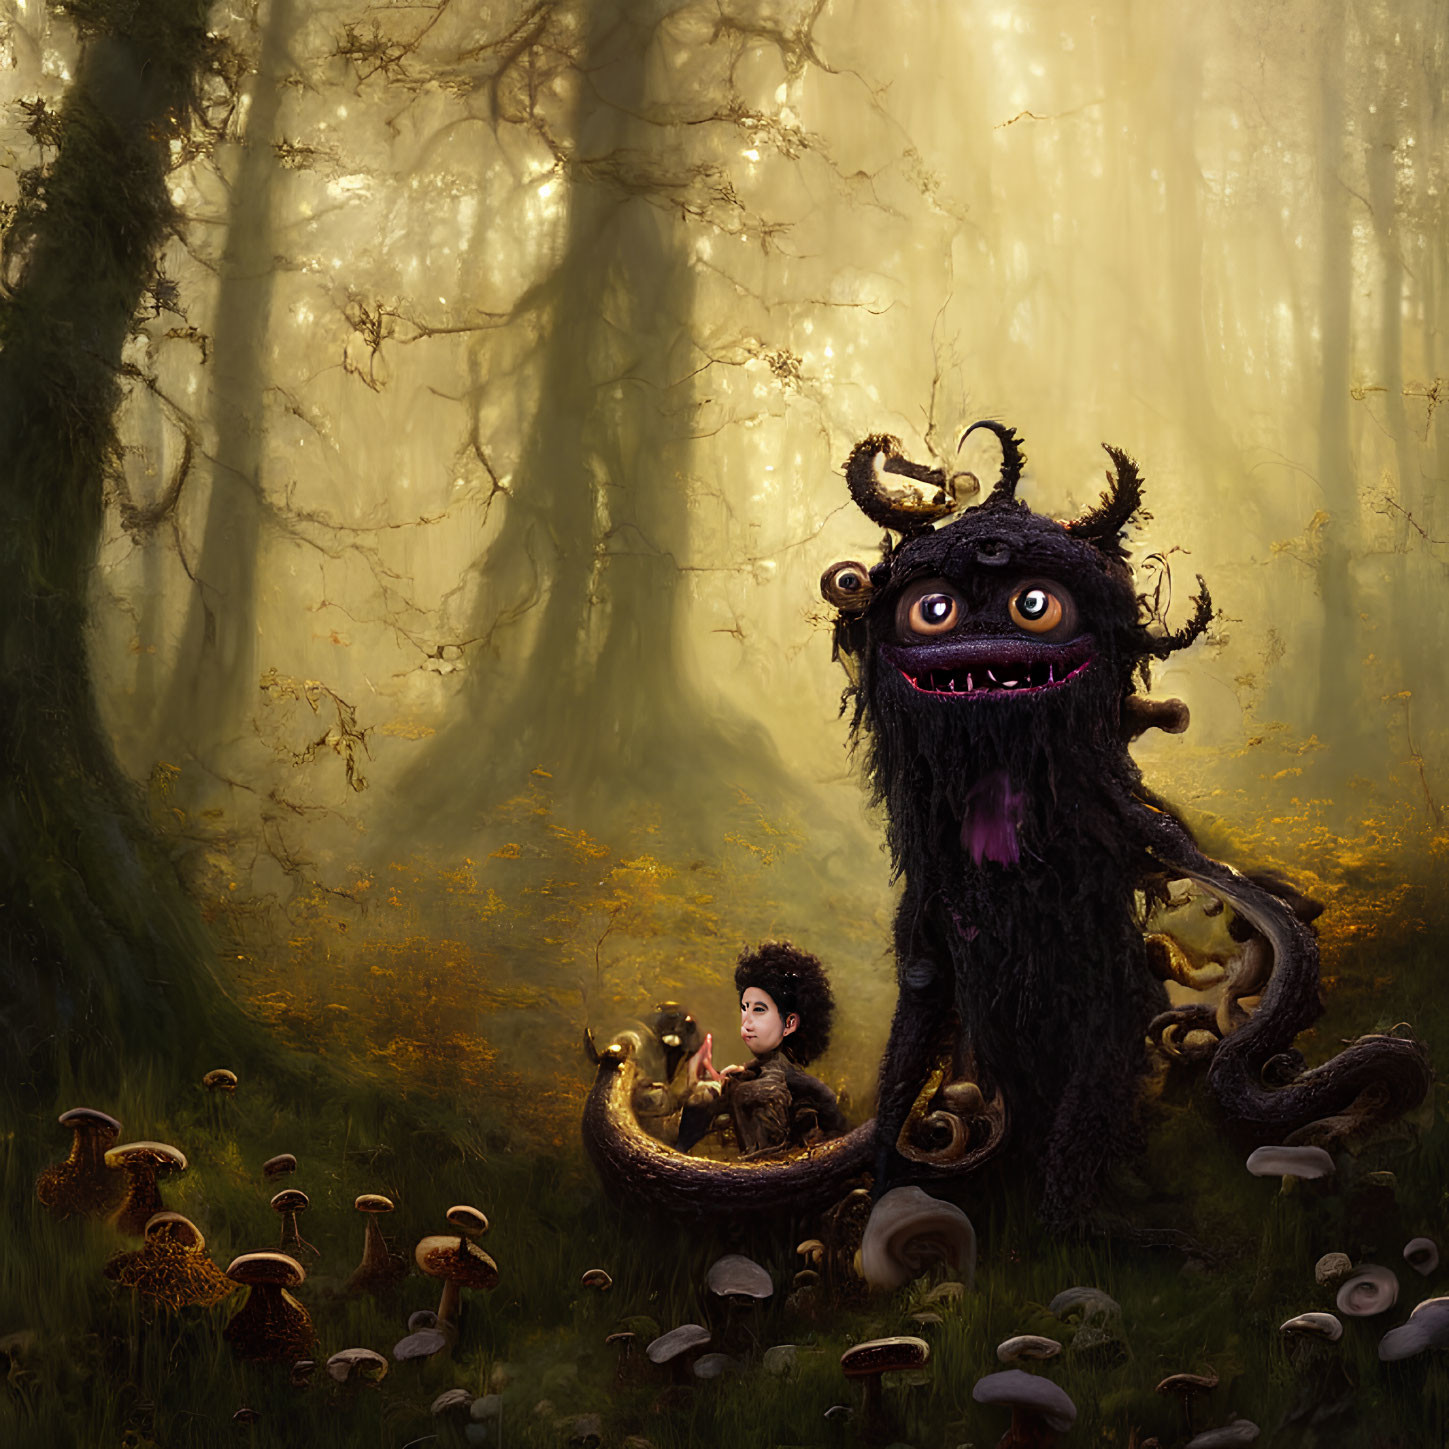 Illustration of child and furry creature in mystical forest with mushrooms and light beams.